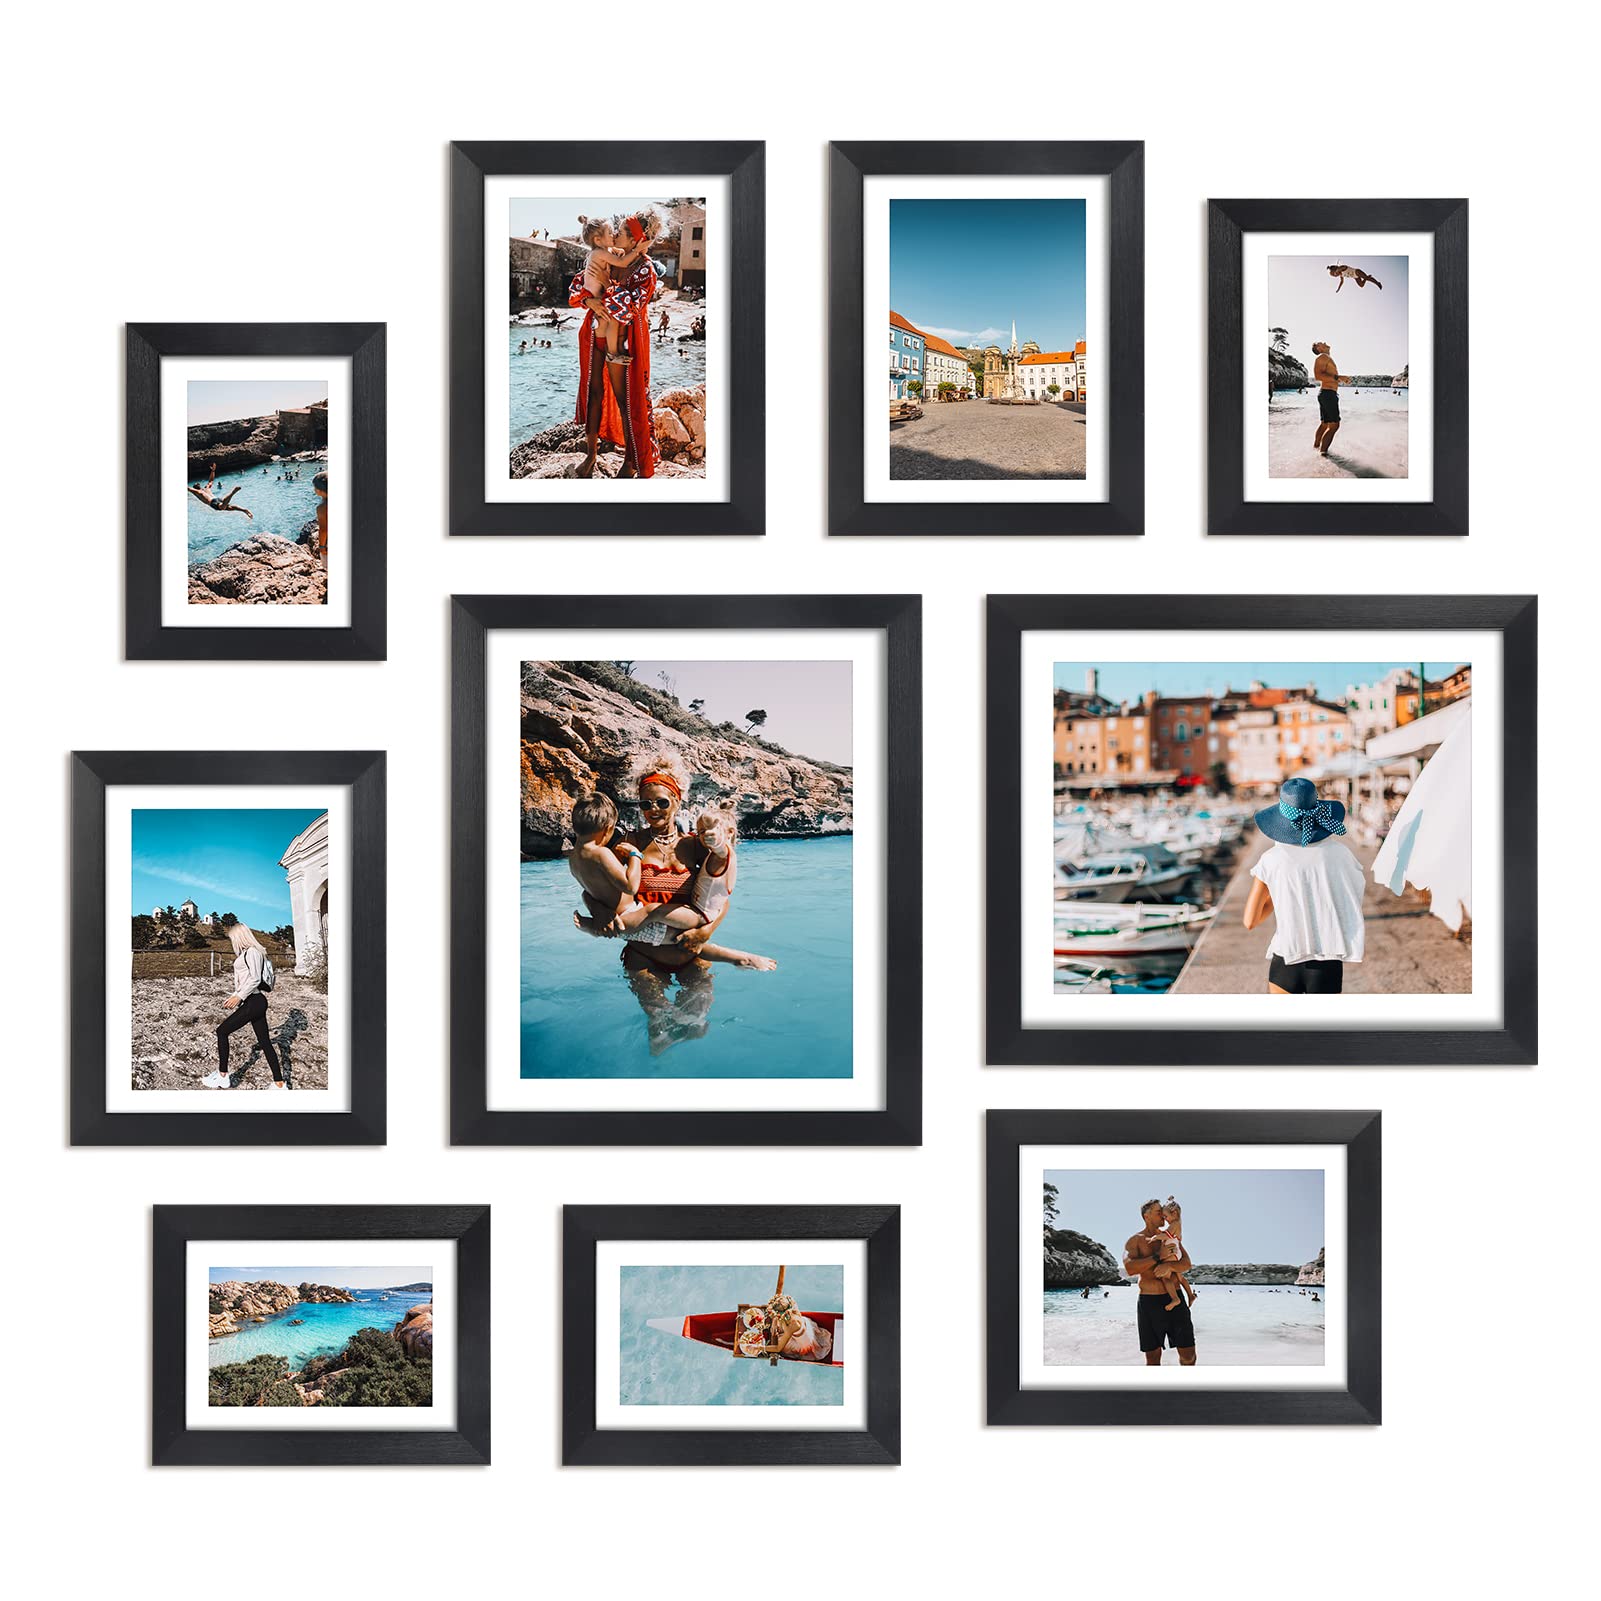 Giftgarden Multi Black Picture Frames with Mat for Multiple Sizes Photos, Four 4x6, Four 5x7, Two 8x10 for Gallery Photo Frame C